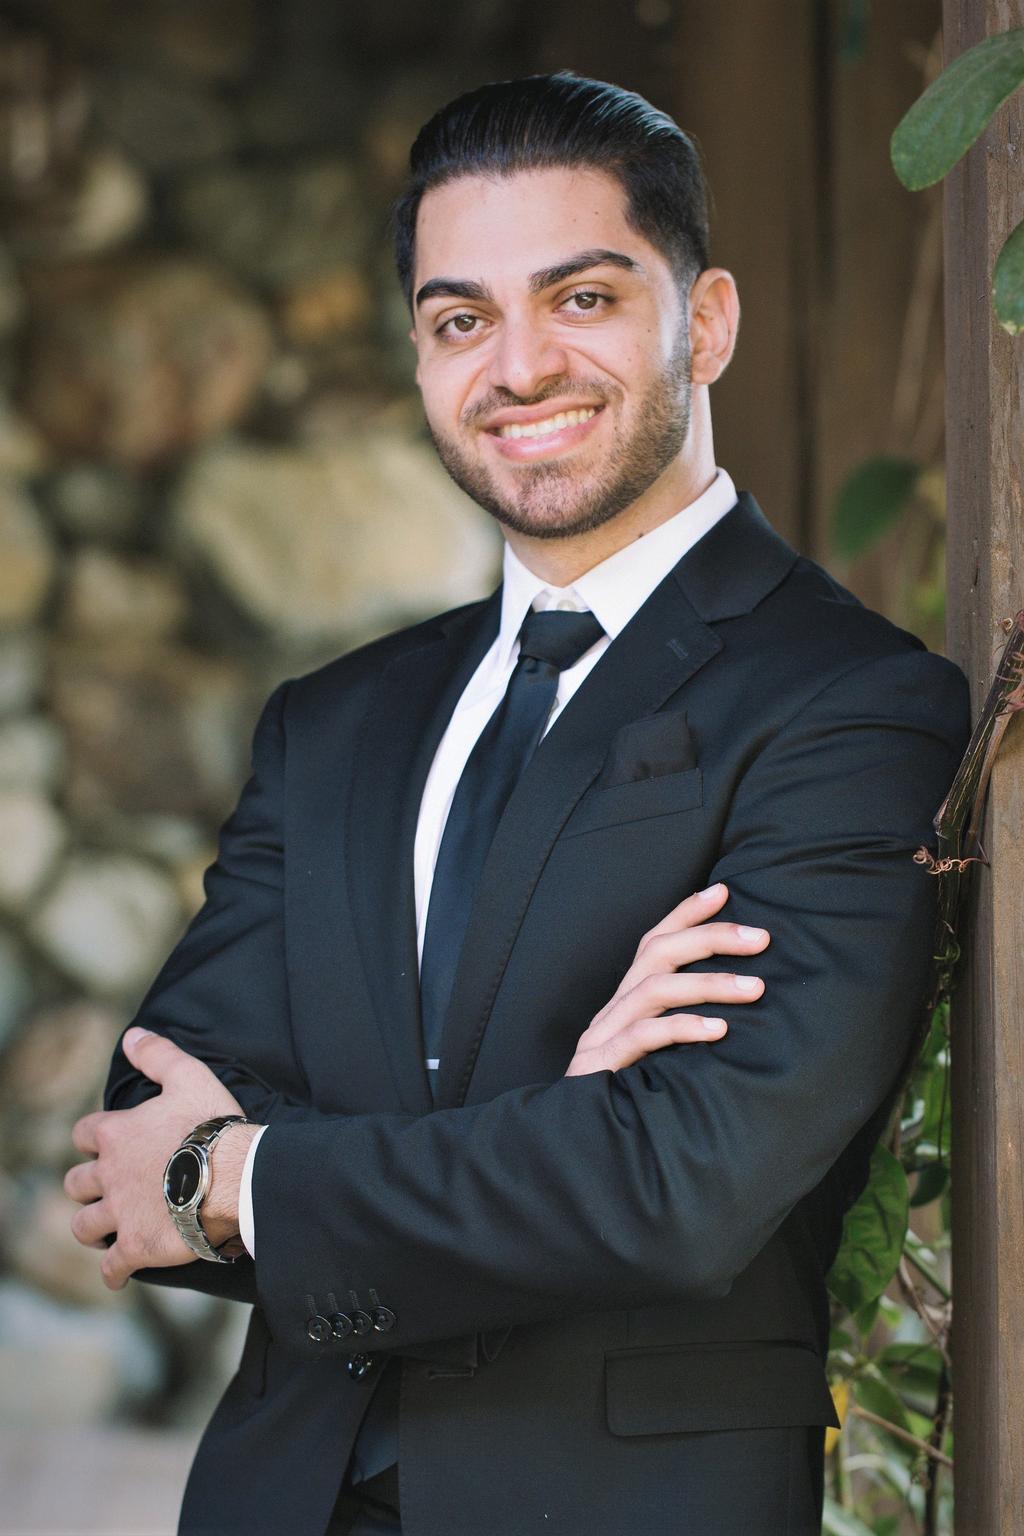 Advisor Bio & Contact MATT ABAWI DRE#02048797 PROFESSIONAL BACKGROUND Associate Advisor Matt was born and raised in San Diego and has lived the majority of that time in East County.